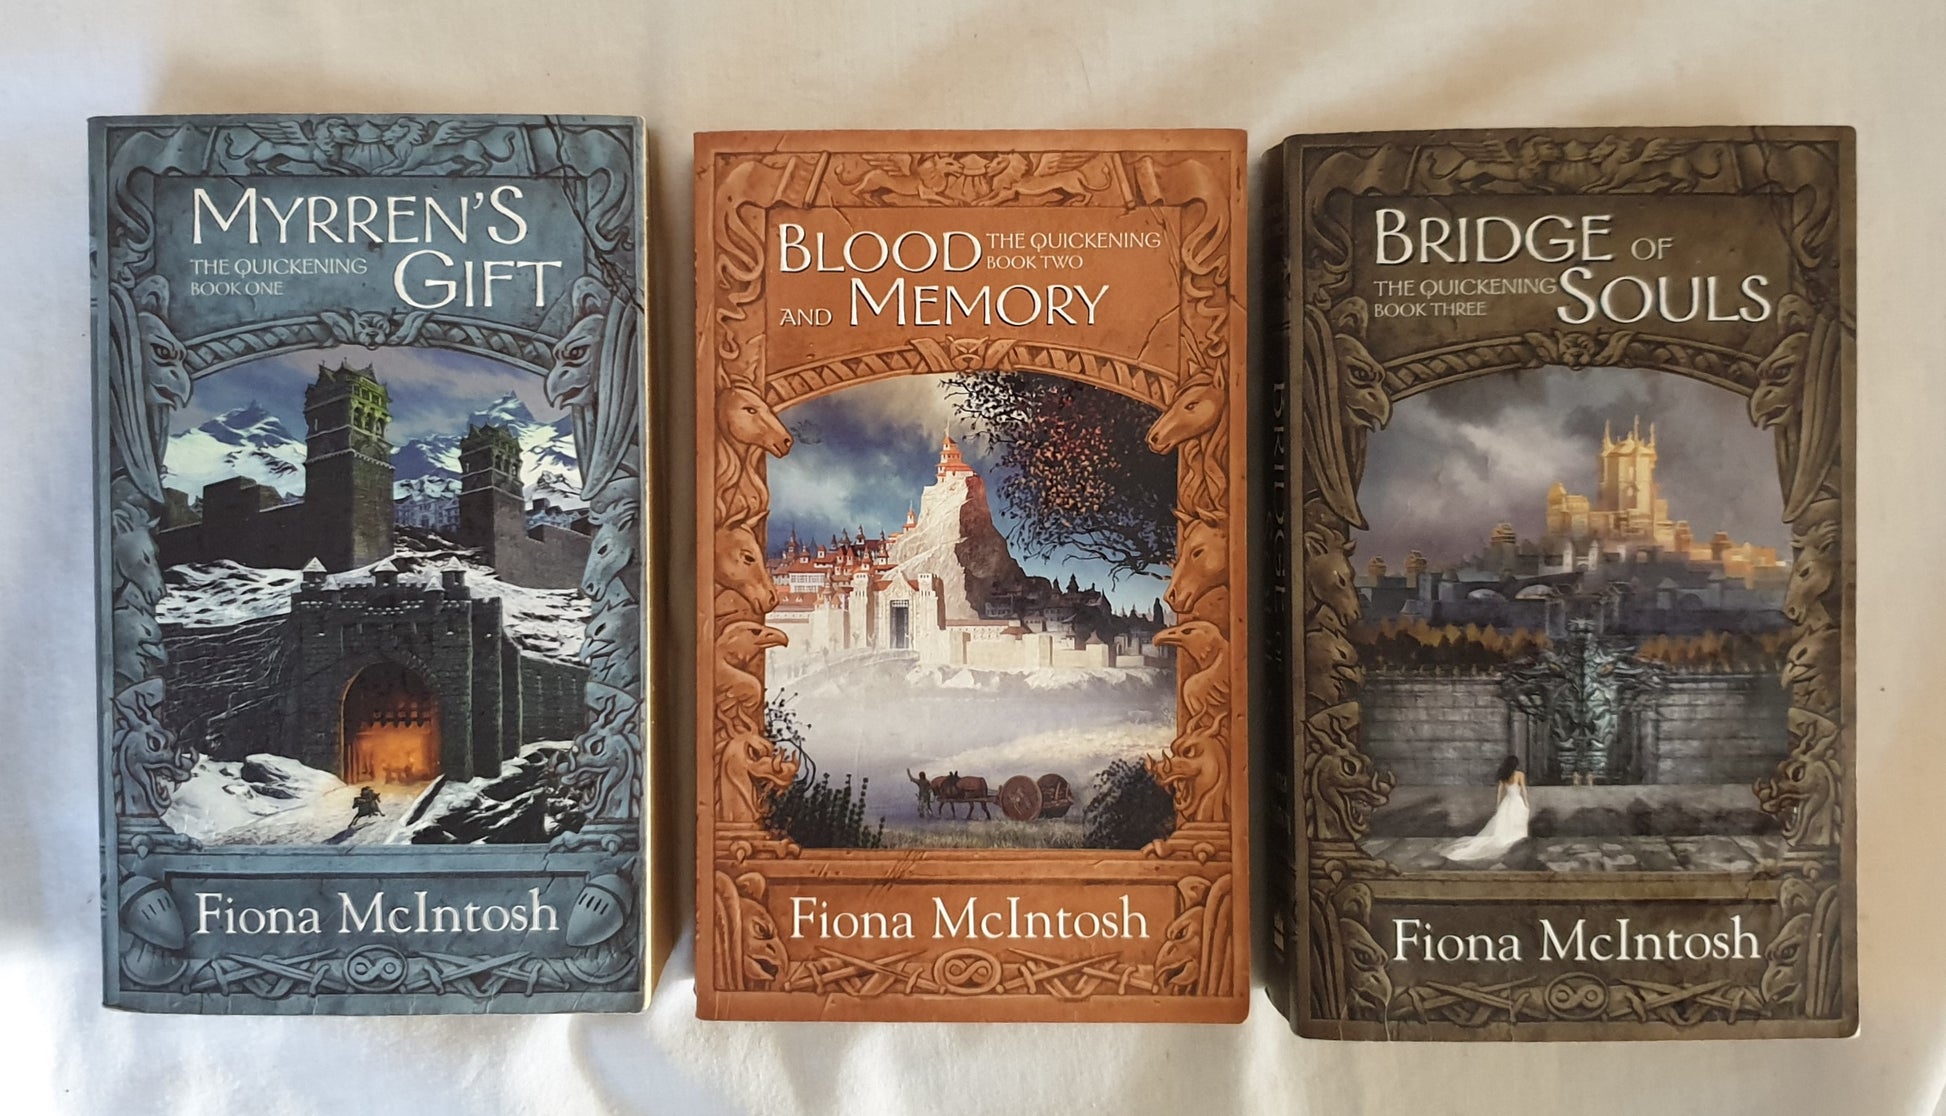 The Quickening Trilogy by Fiona McIntosh (complete set)